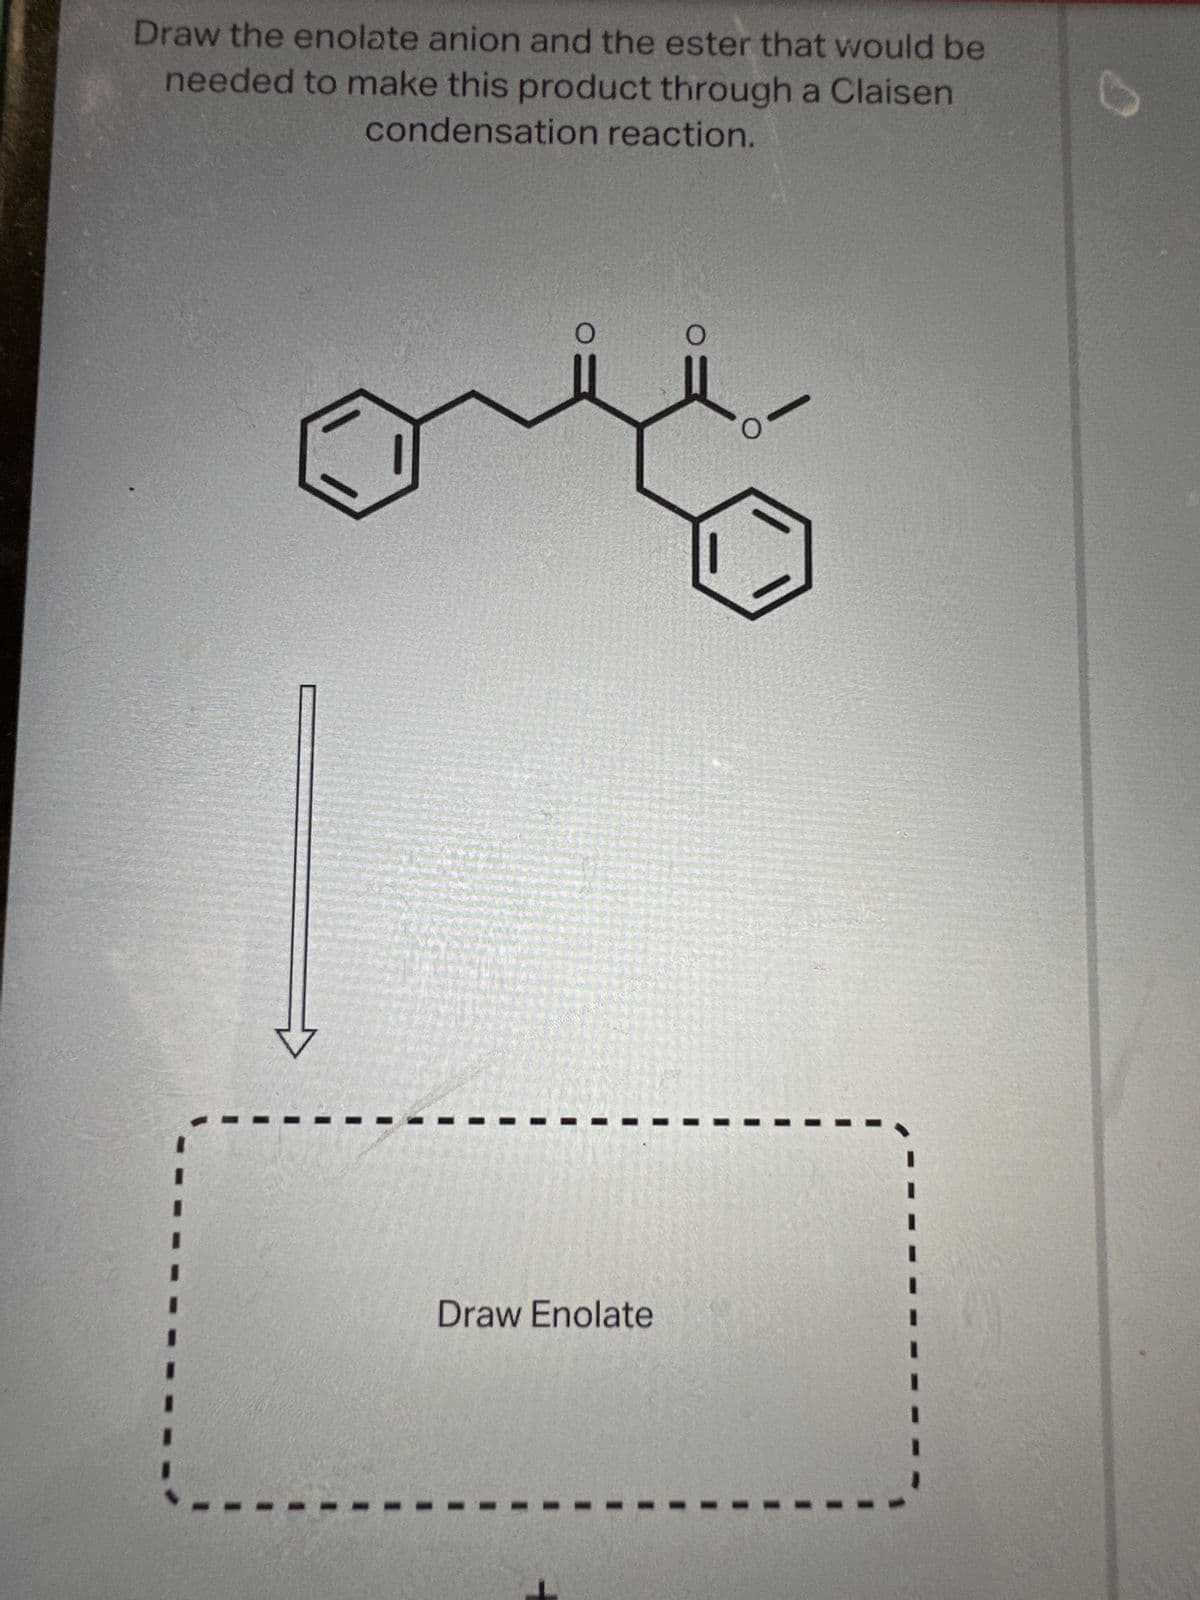 Draw the enolate anion and the ester that would be
needed to make this product through a Claisen
condensation reaction.
peressierteissyle & Prei
Draw Enolate
0=